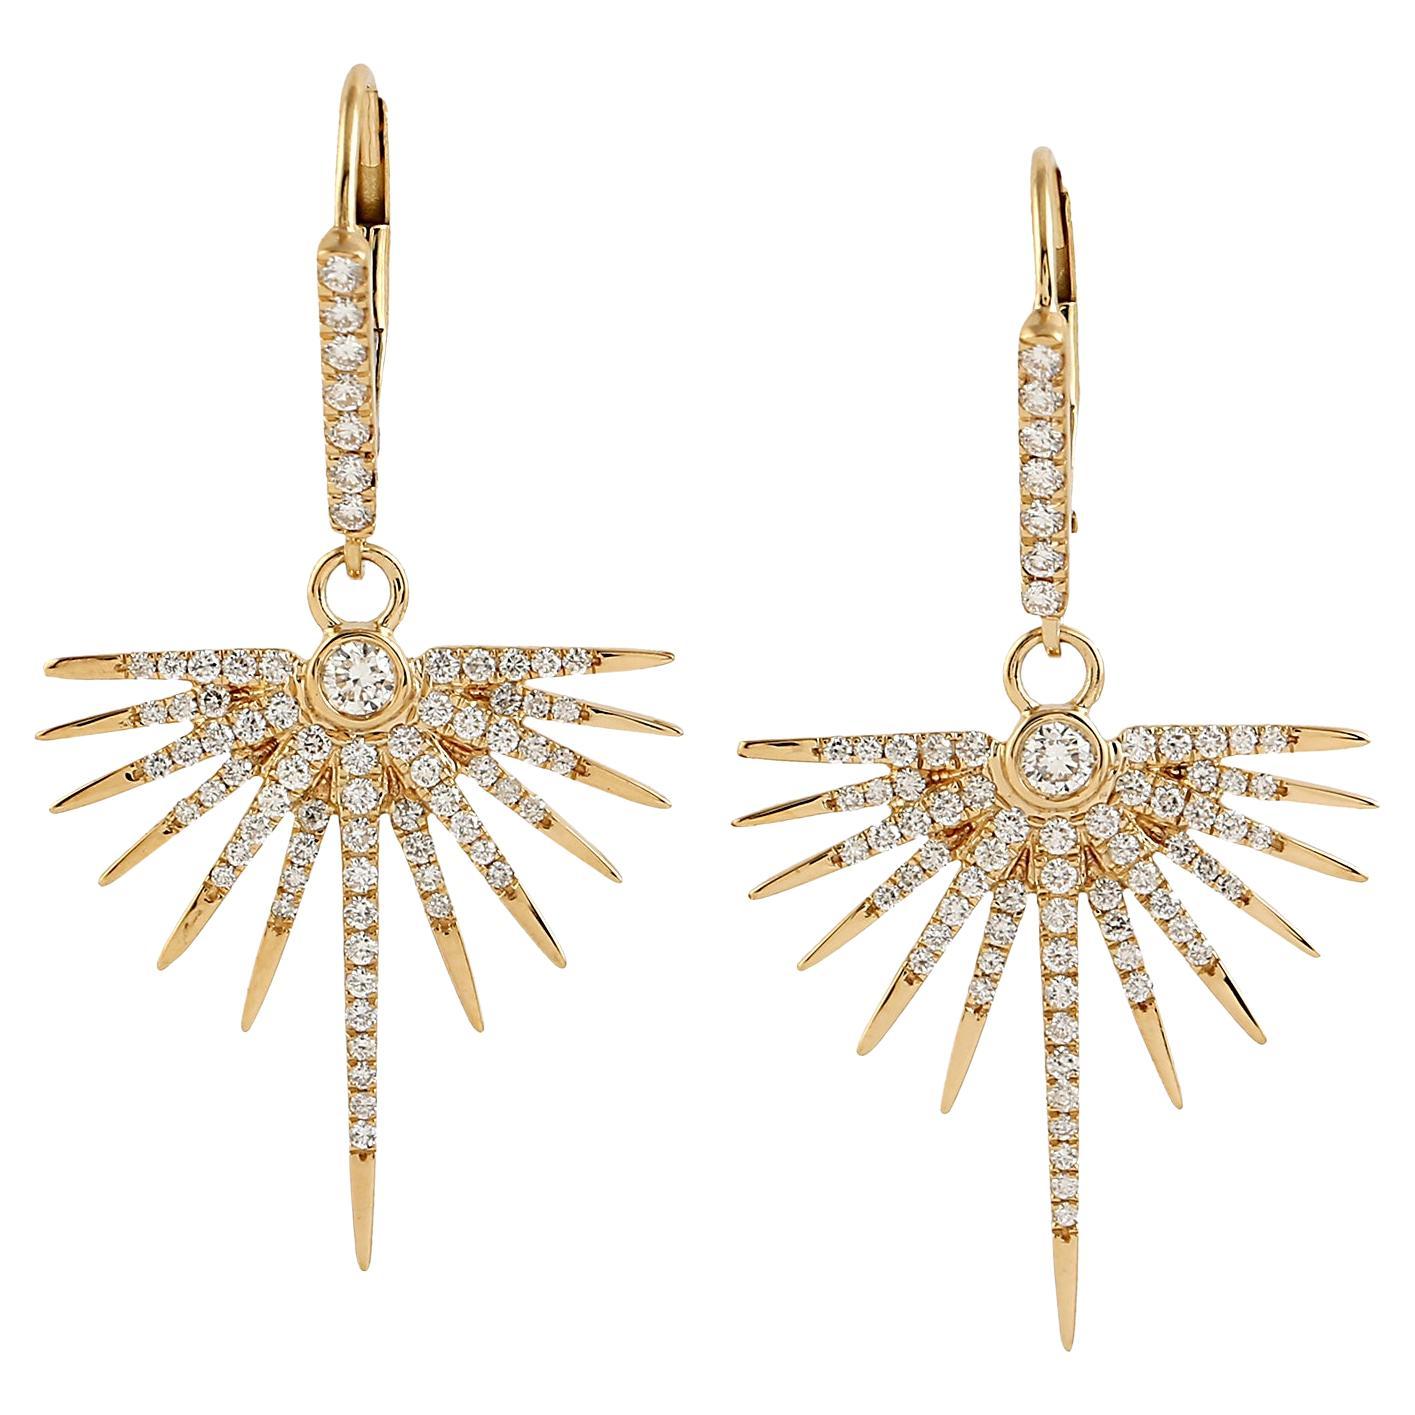 Sunburst Earrings With Diamonds Made In 18k Yellow Gold For Sale